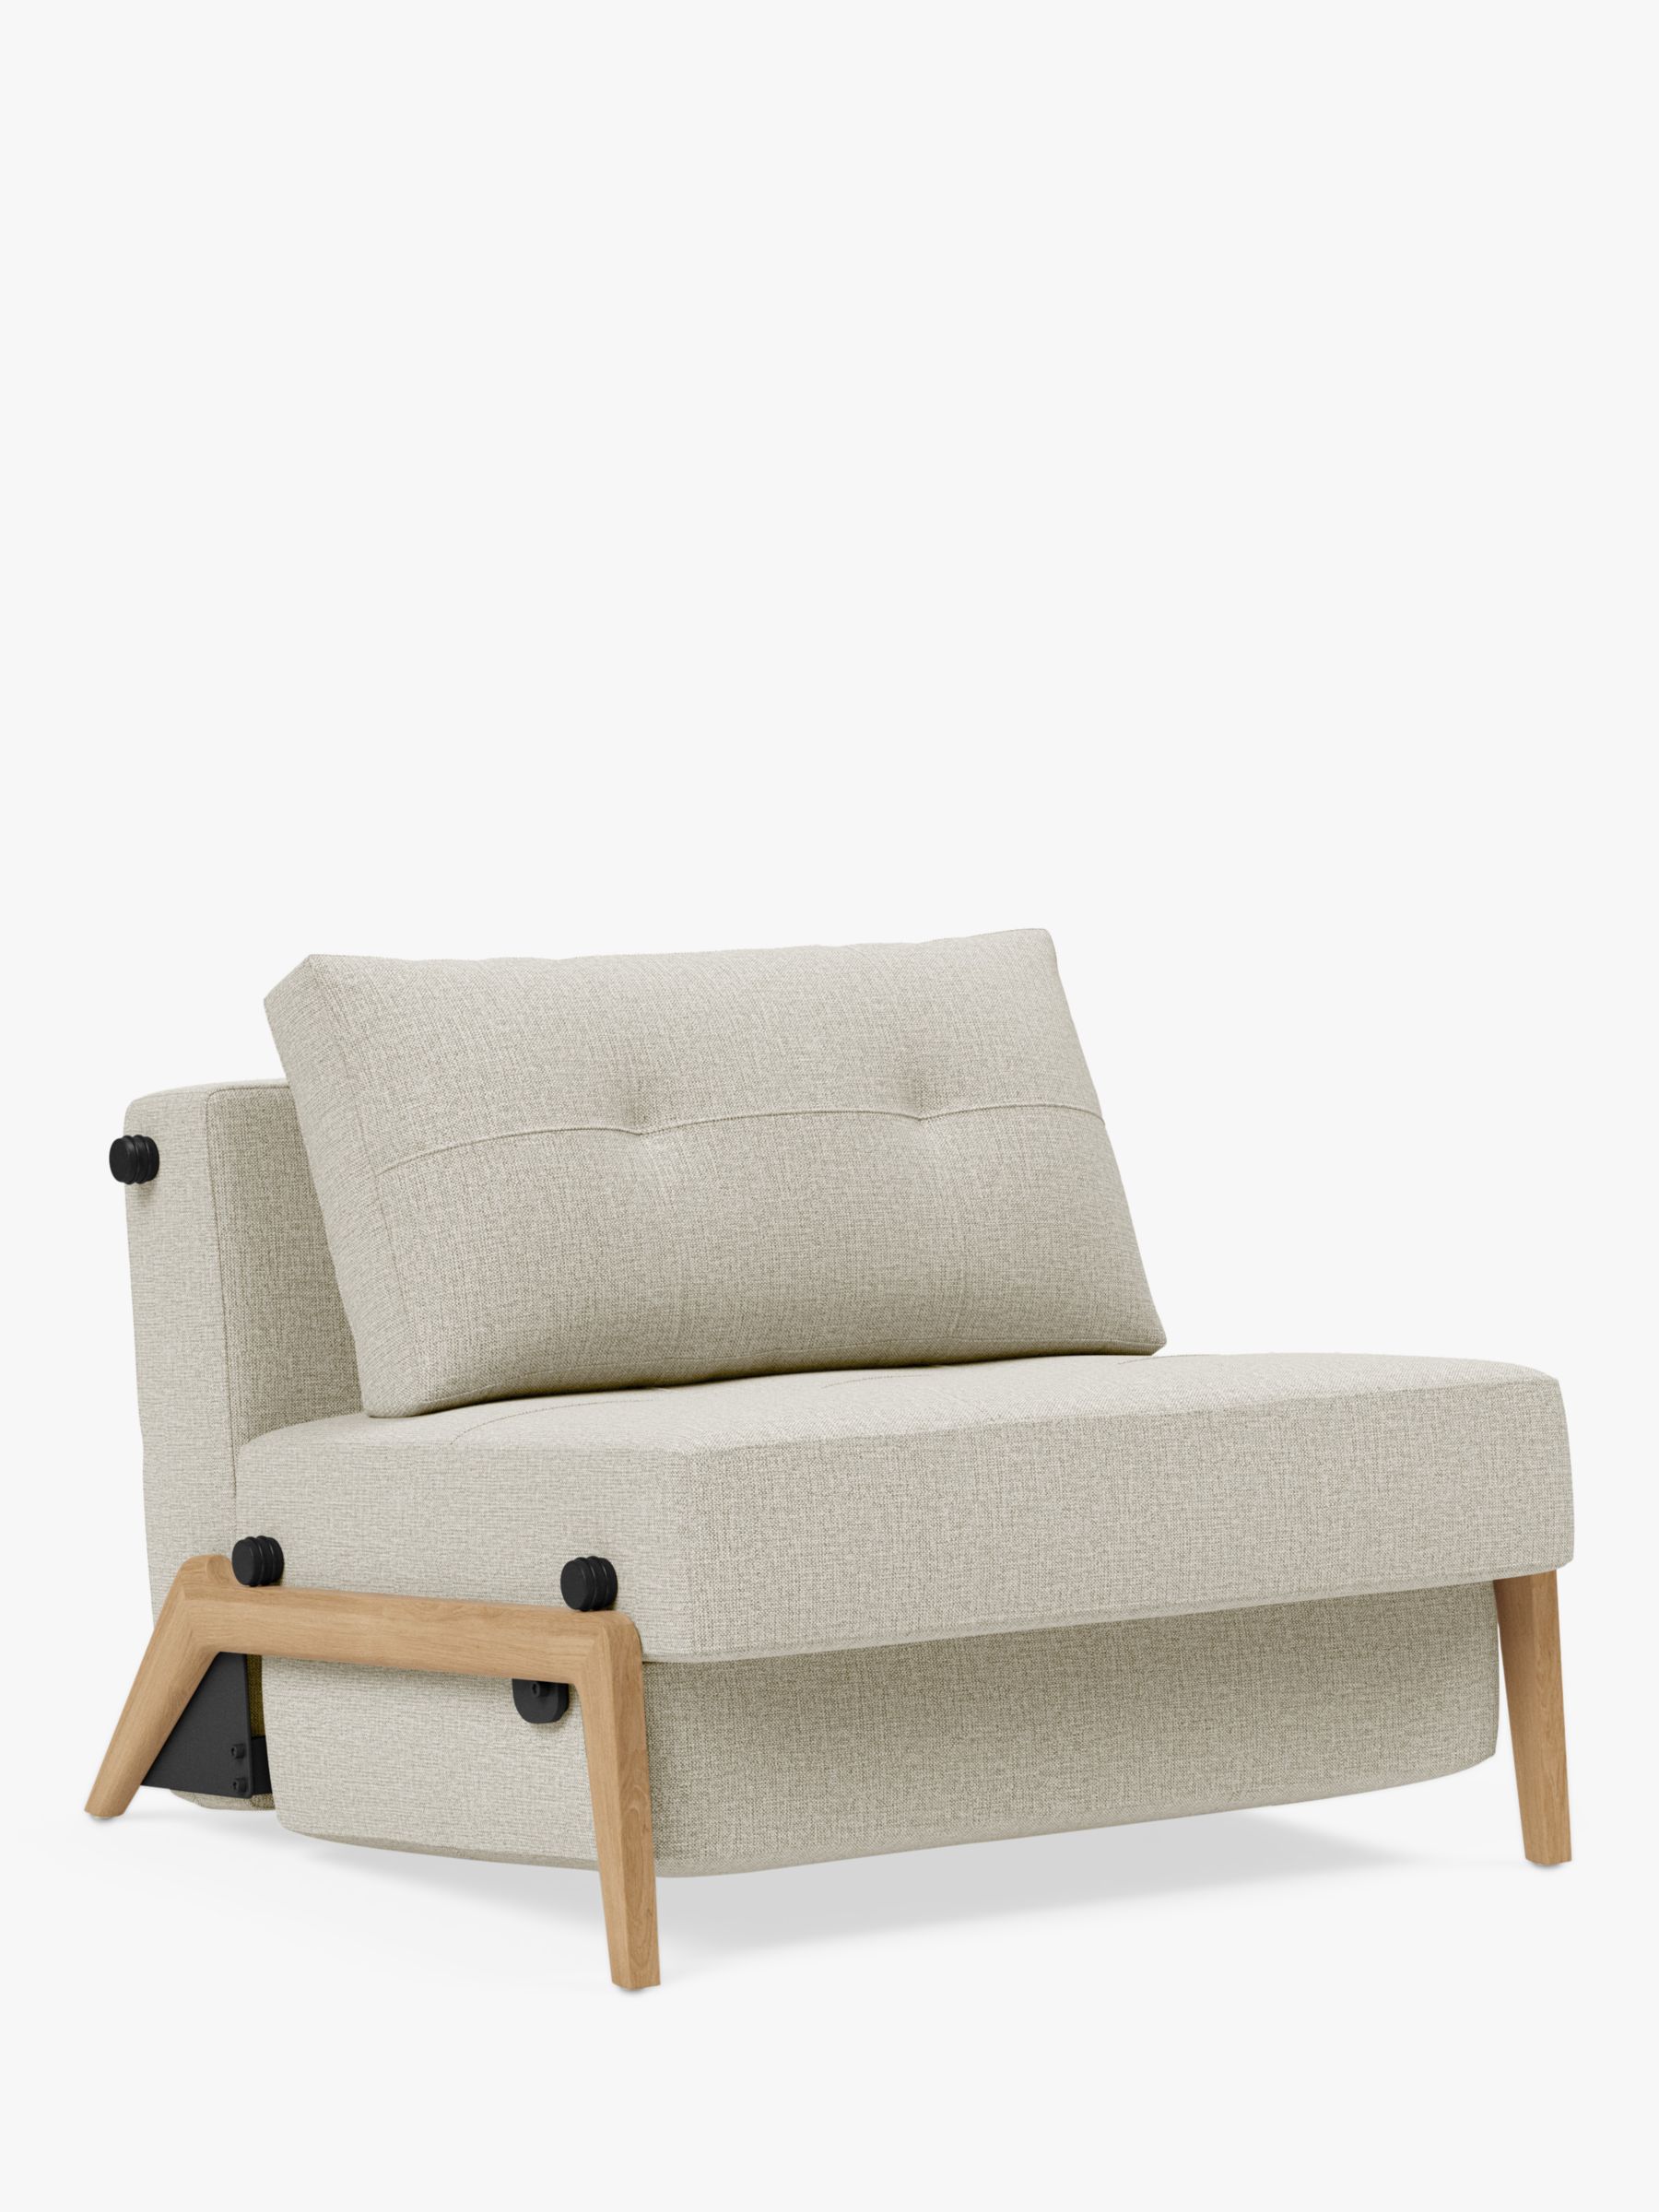 Cubed 90 Range, Innovation Living Cubed 90 Armchair Bed, Natural Weave